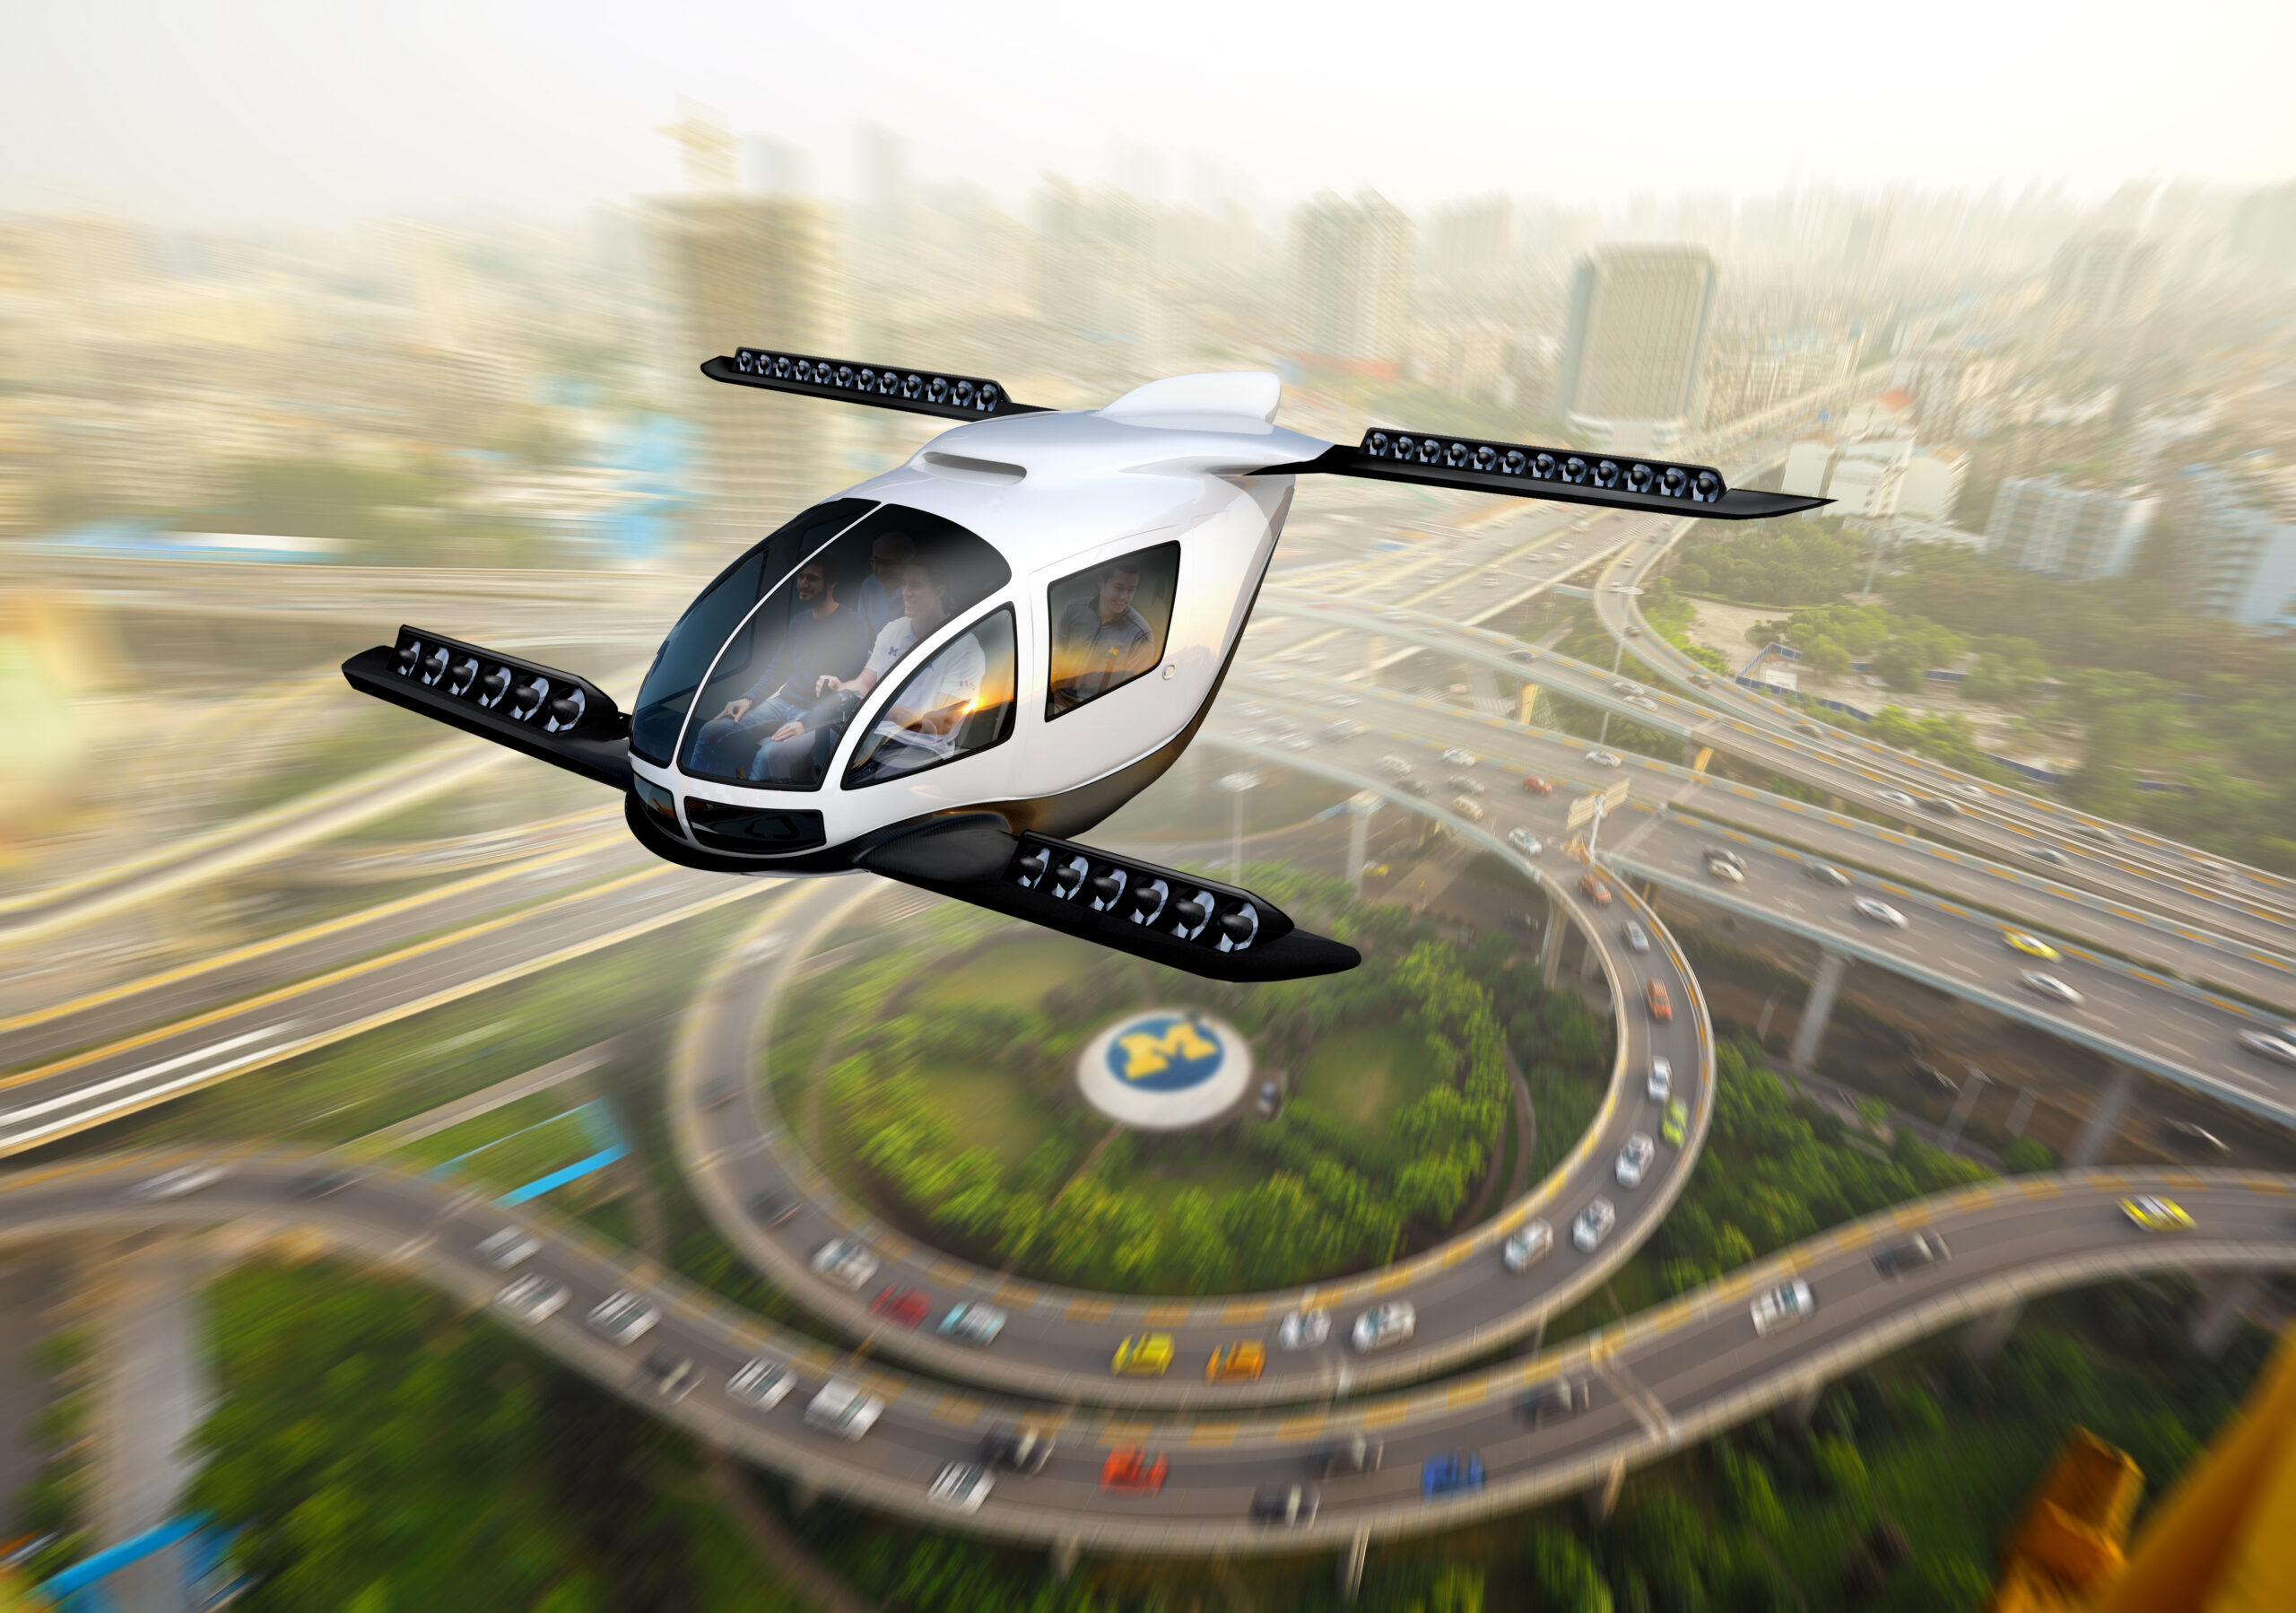 Flying cars will only be eco-friendly if we use them right